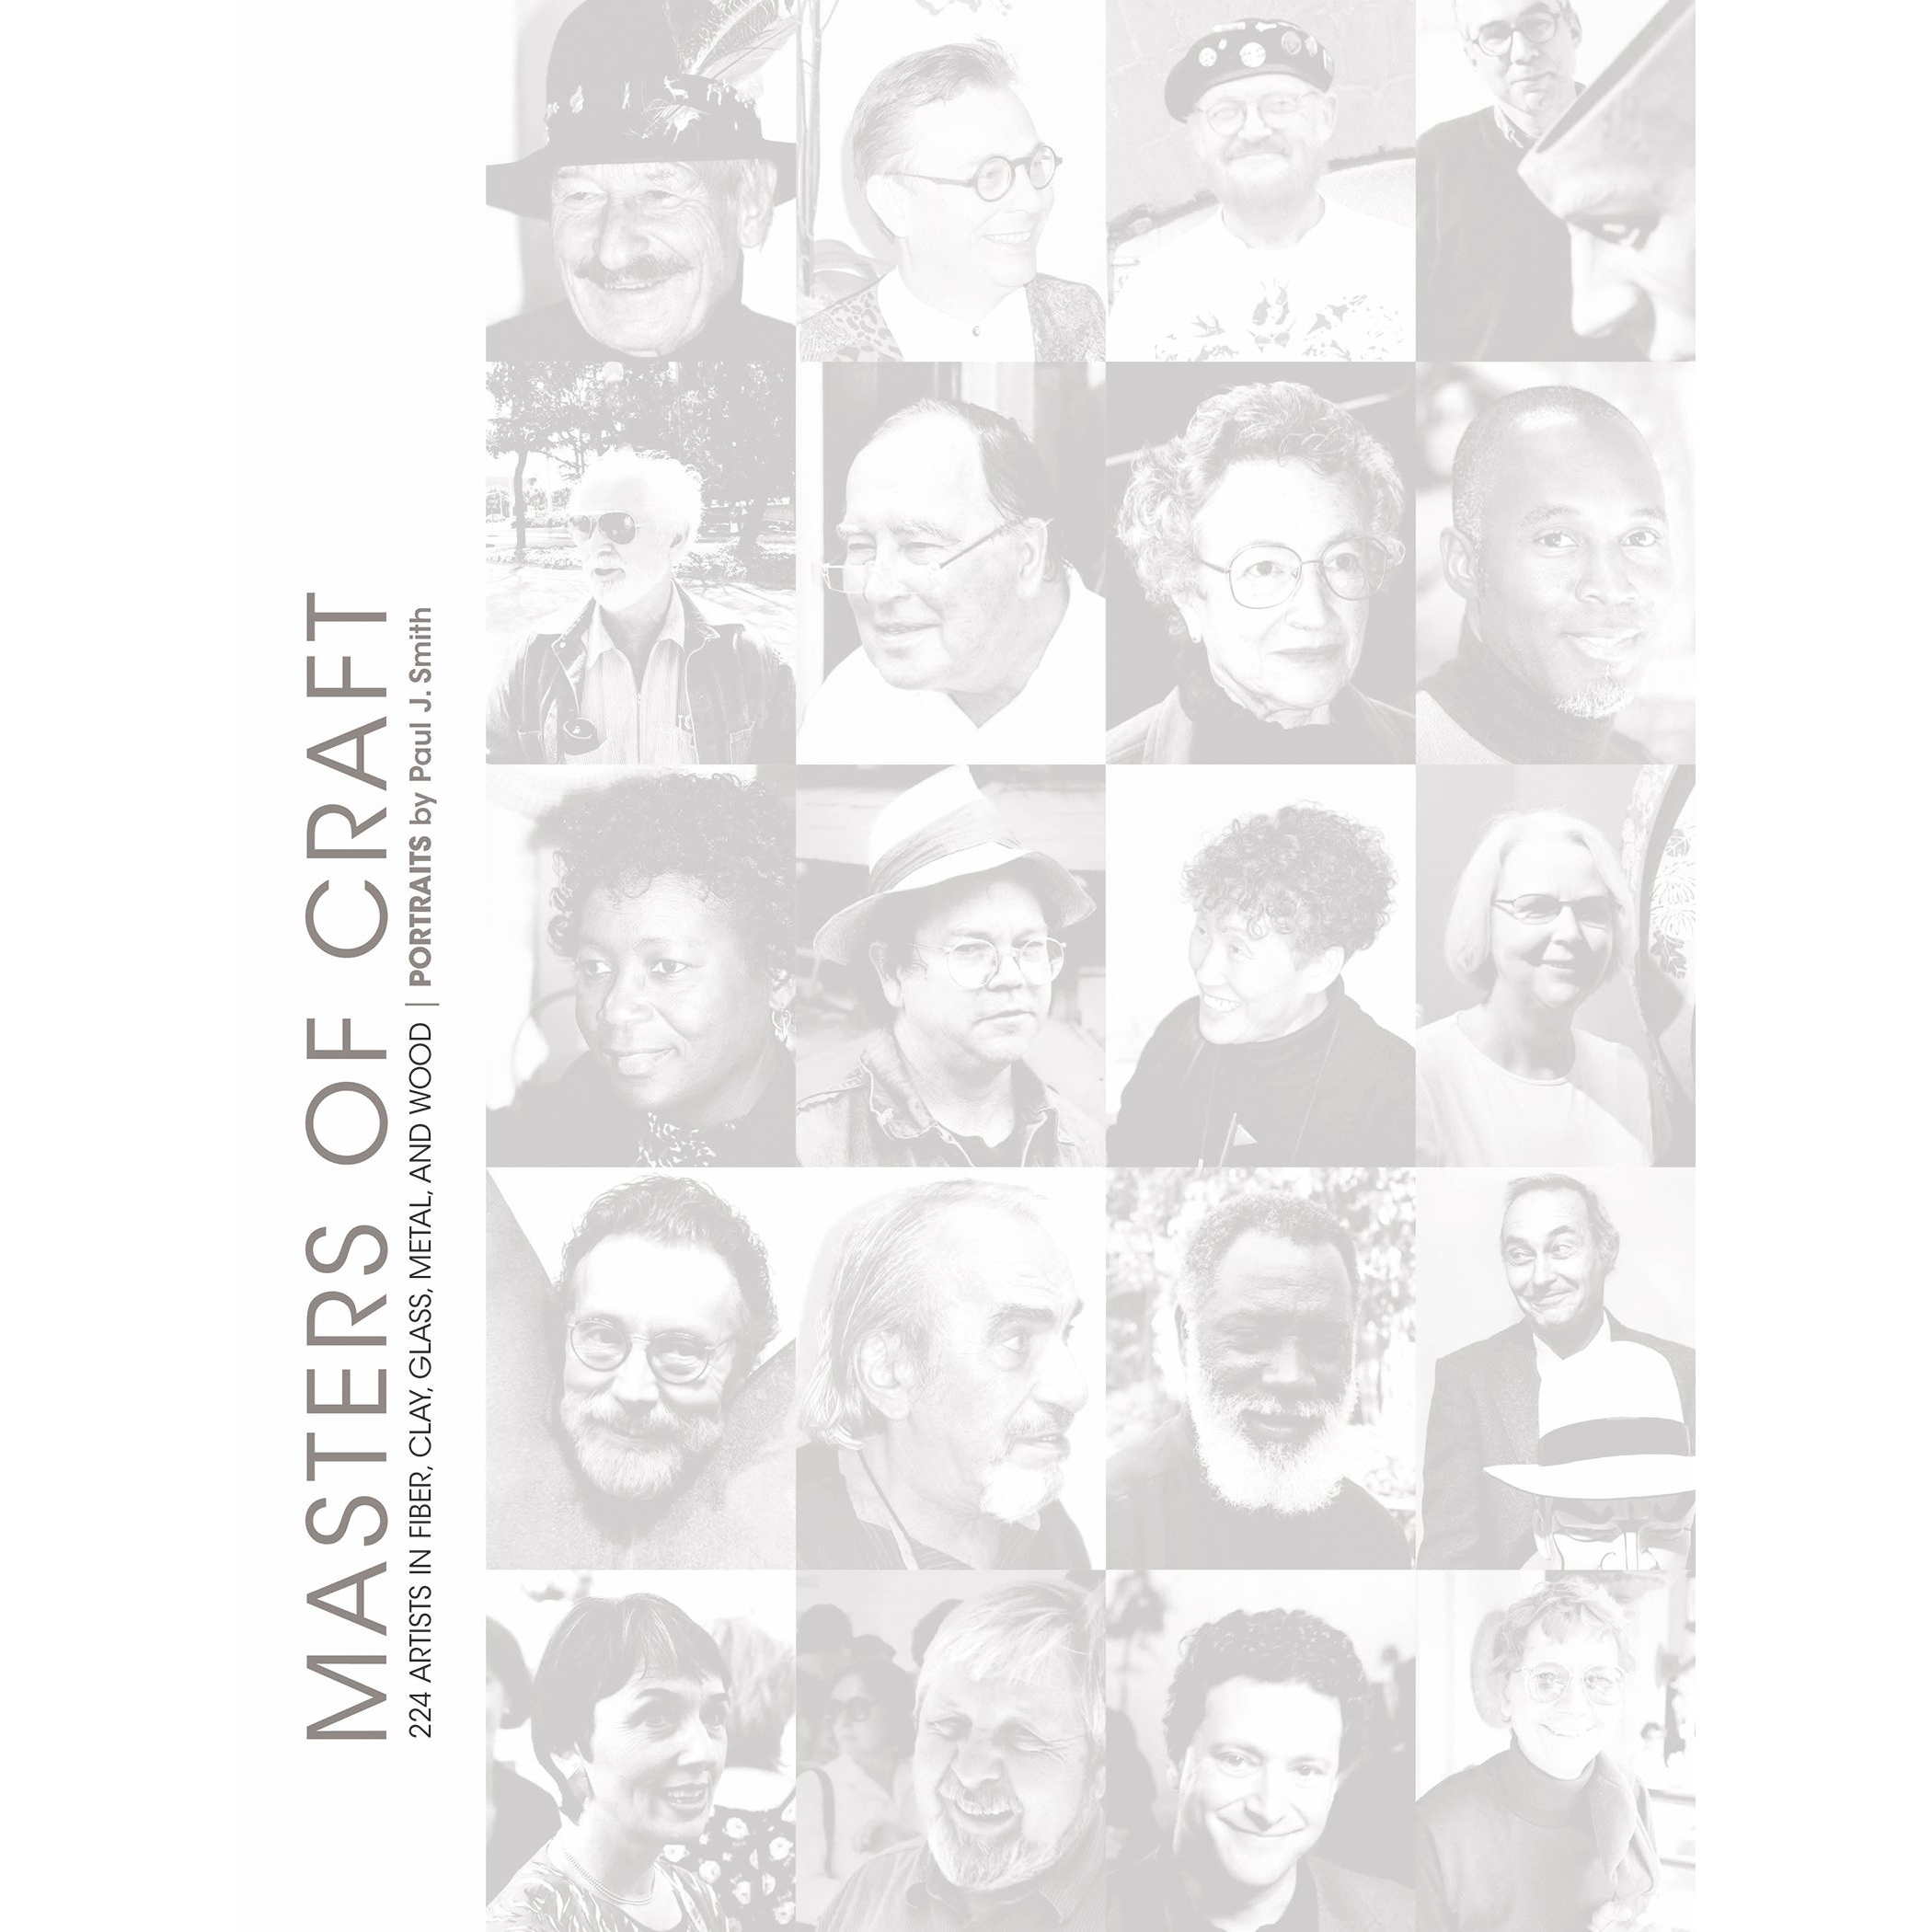 Masters of Craft: 224 Artists in Fiber, Clay, Glass, Metal, and Wood: Portraits by Paul J. Smith - Hardcover